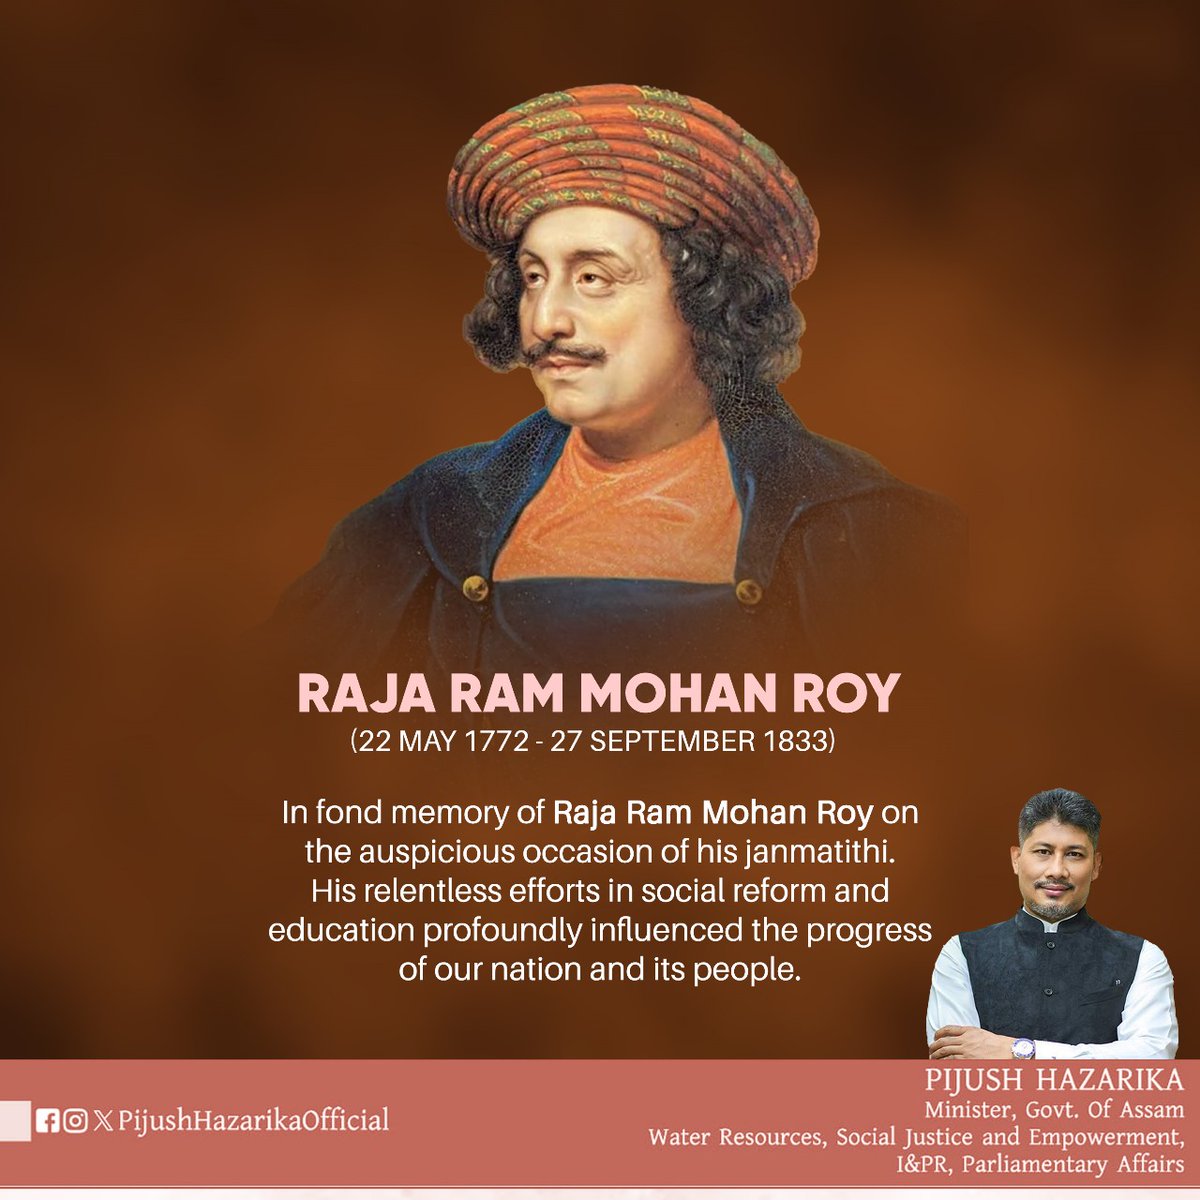 Remembering the great educationist, social reformer, #RajaRamMohanRoy on his janmatithi. The founder of Brahmo Samaj, he will always be recognised for his stern action against heinous 'Sati System' and enhancing modern education is India.